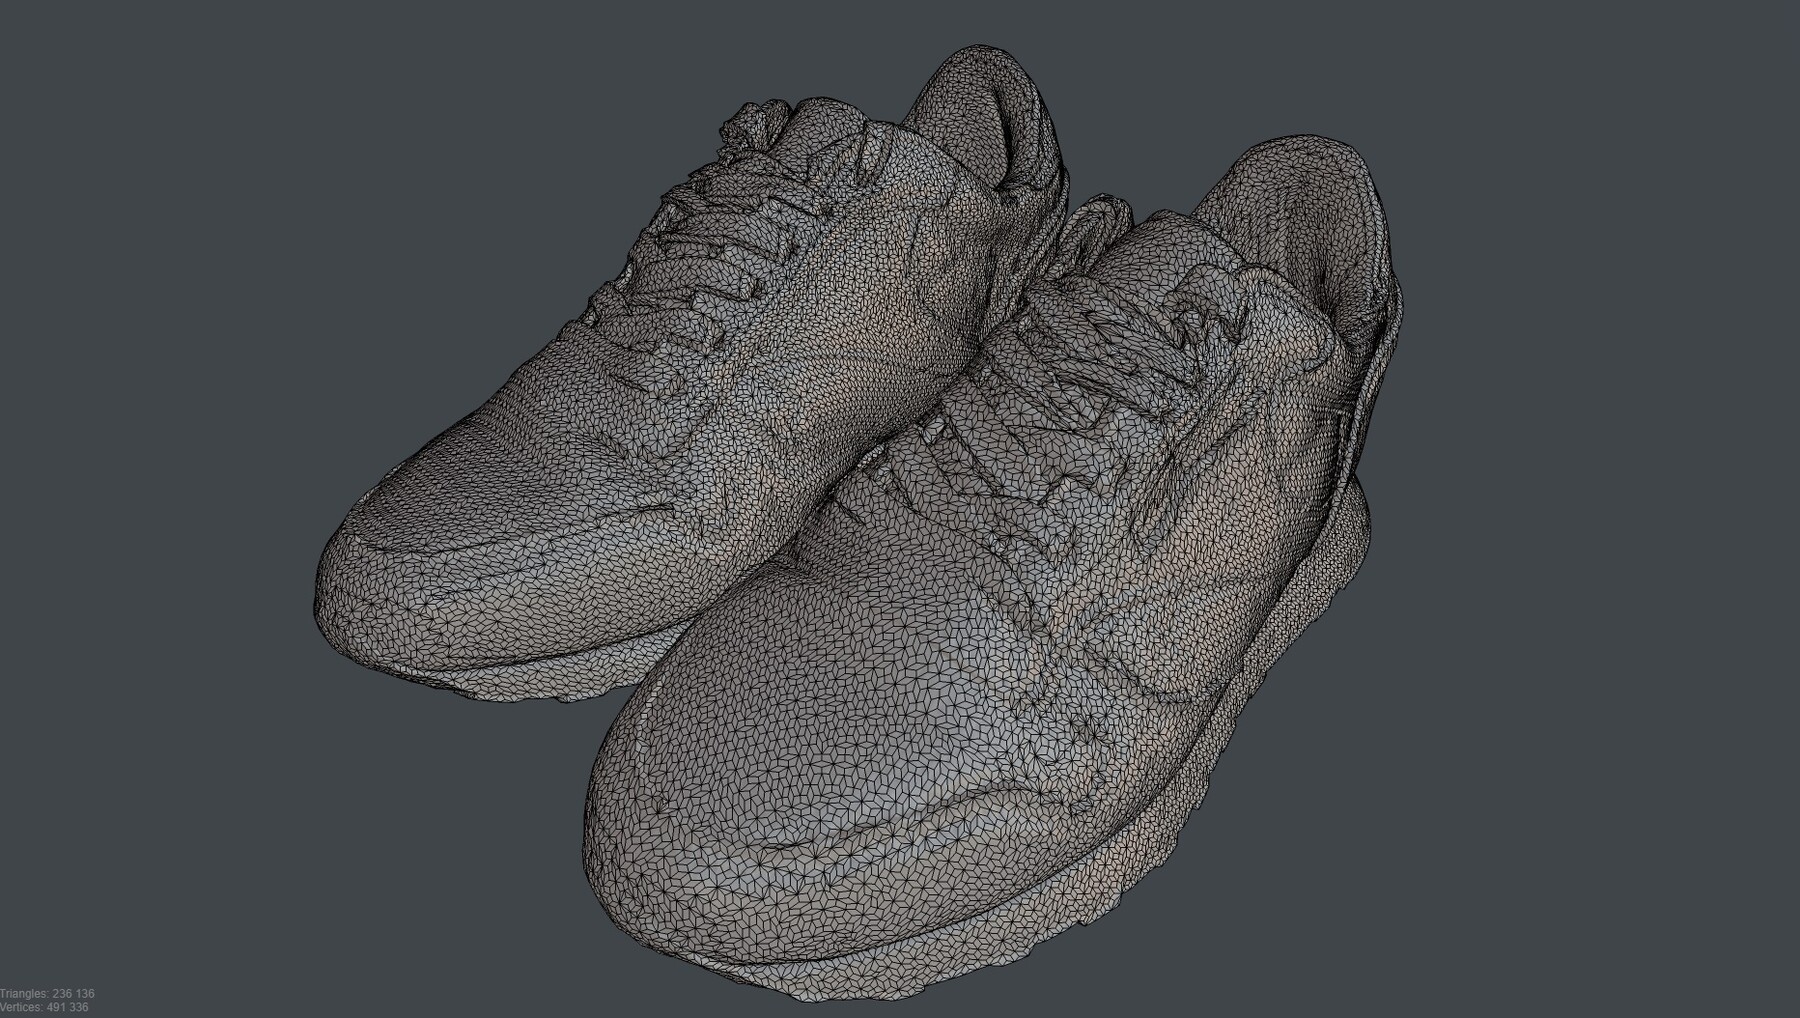 ArtStation - Reebok Classic Leather Shoes Low-poly | Game Assets